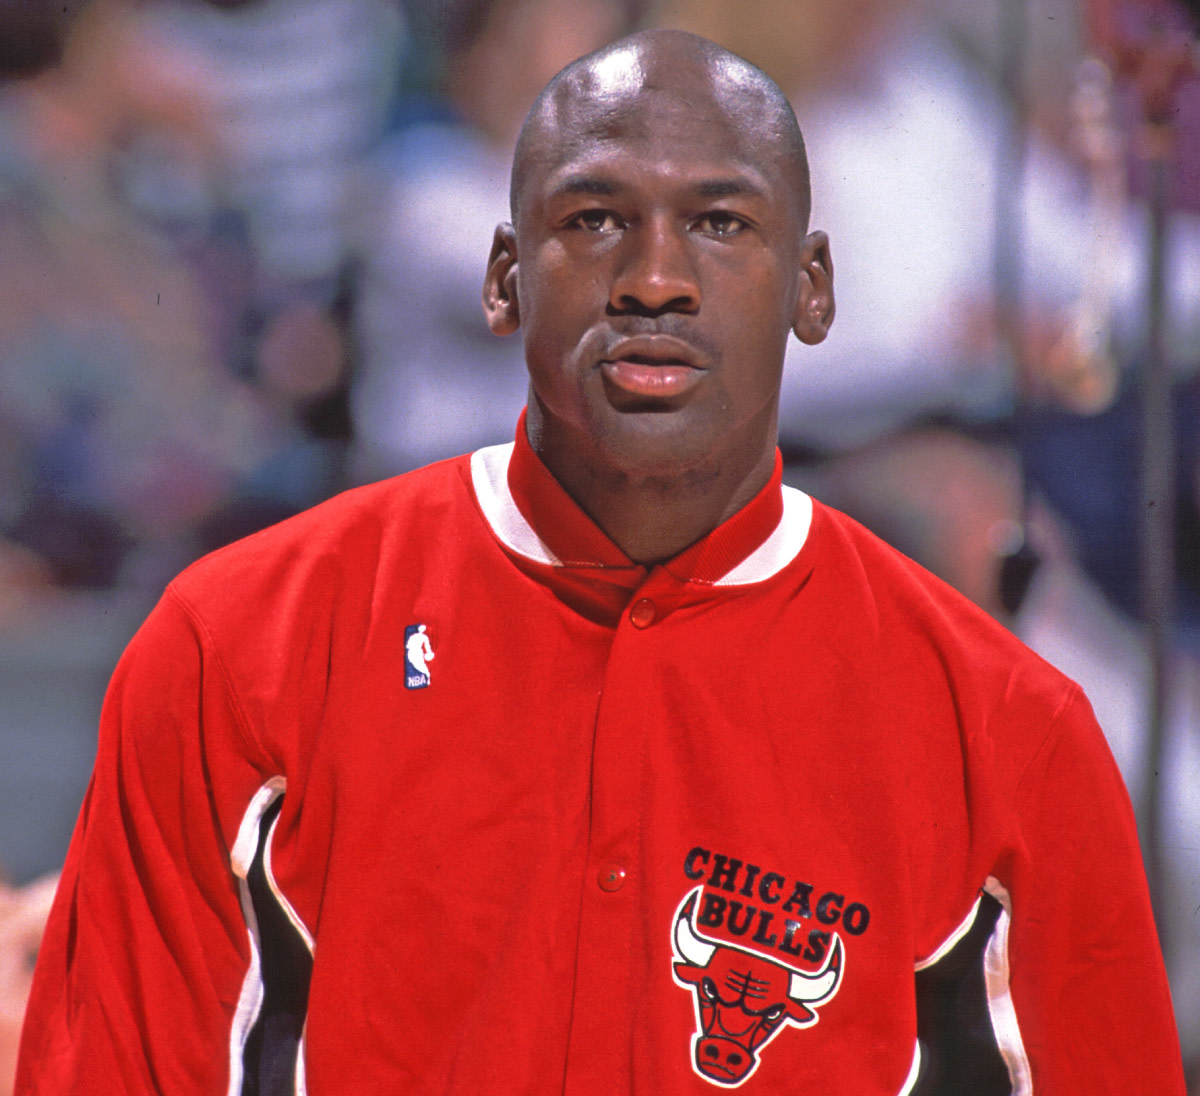 Michael Jordan Explained His Biggest Fears And Nightmares In A 1989 Interview: "The Things That Most Scare Me Are The Bad Things - The Things That Would Tear Down Michael Jordan's Image. That's The Biggest Fear I Face."